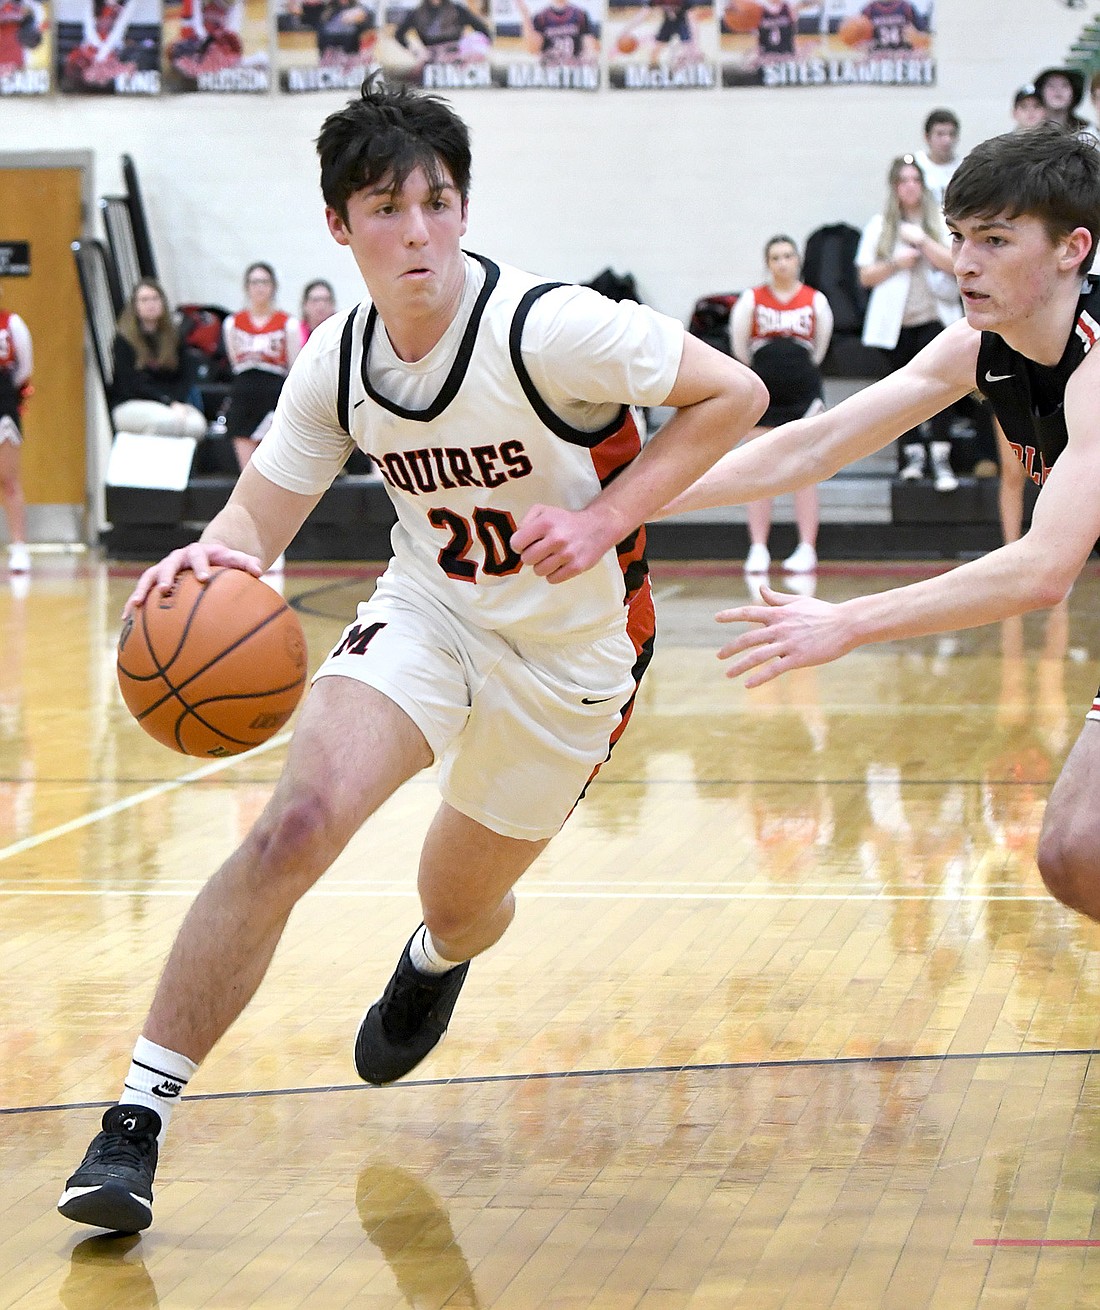 Manchester senior Gavin Martin drives to the basket during Tuesday night's home game against Bluffton. Photo by Gary Nieter